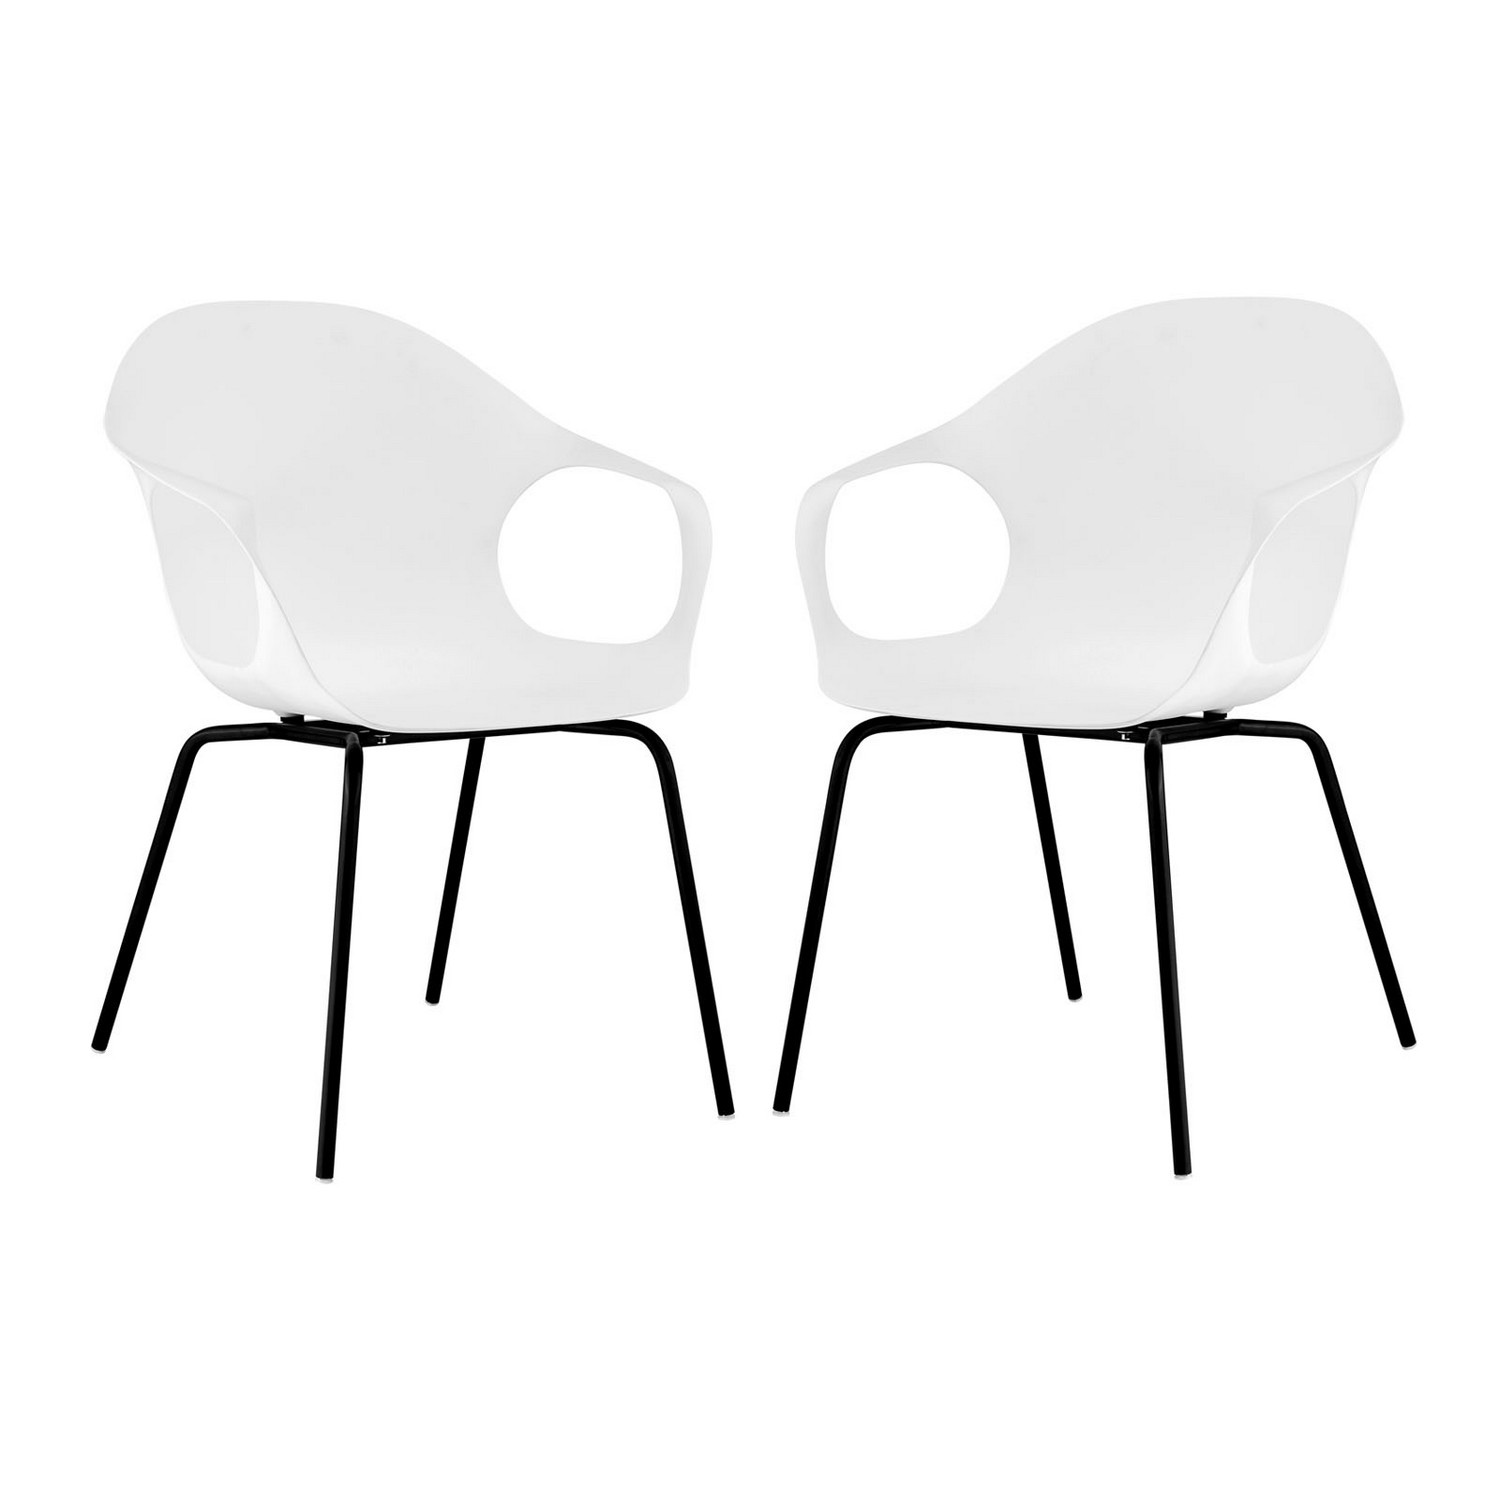 Modway Swerve Dining Chair - Set of 2 - White